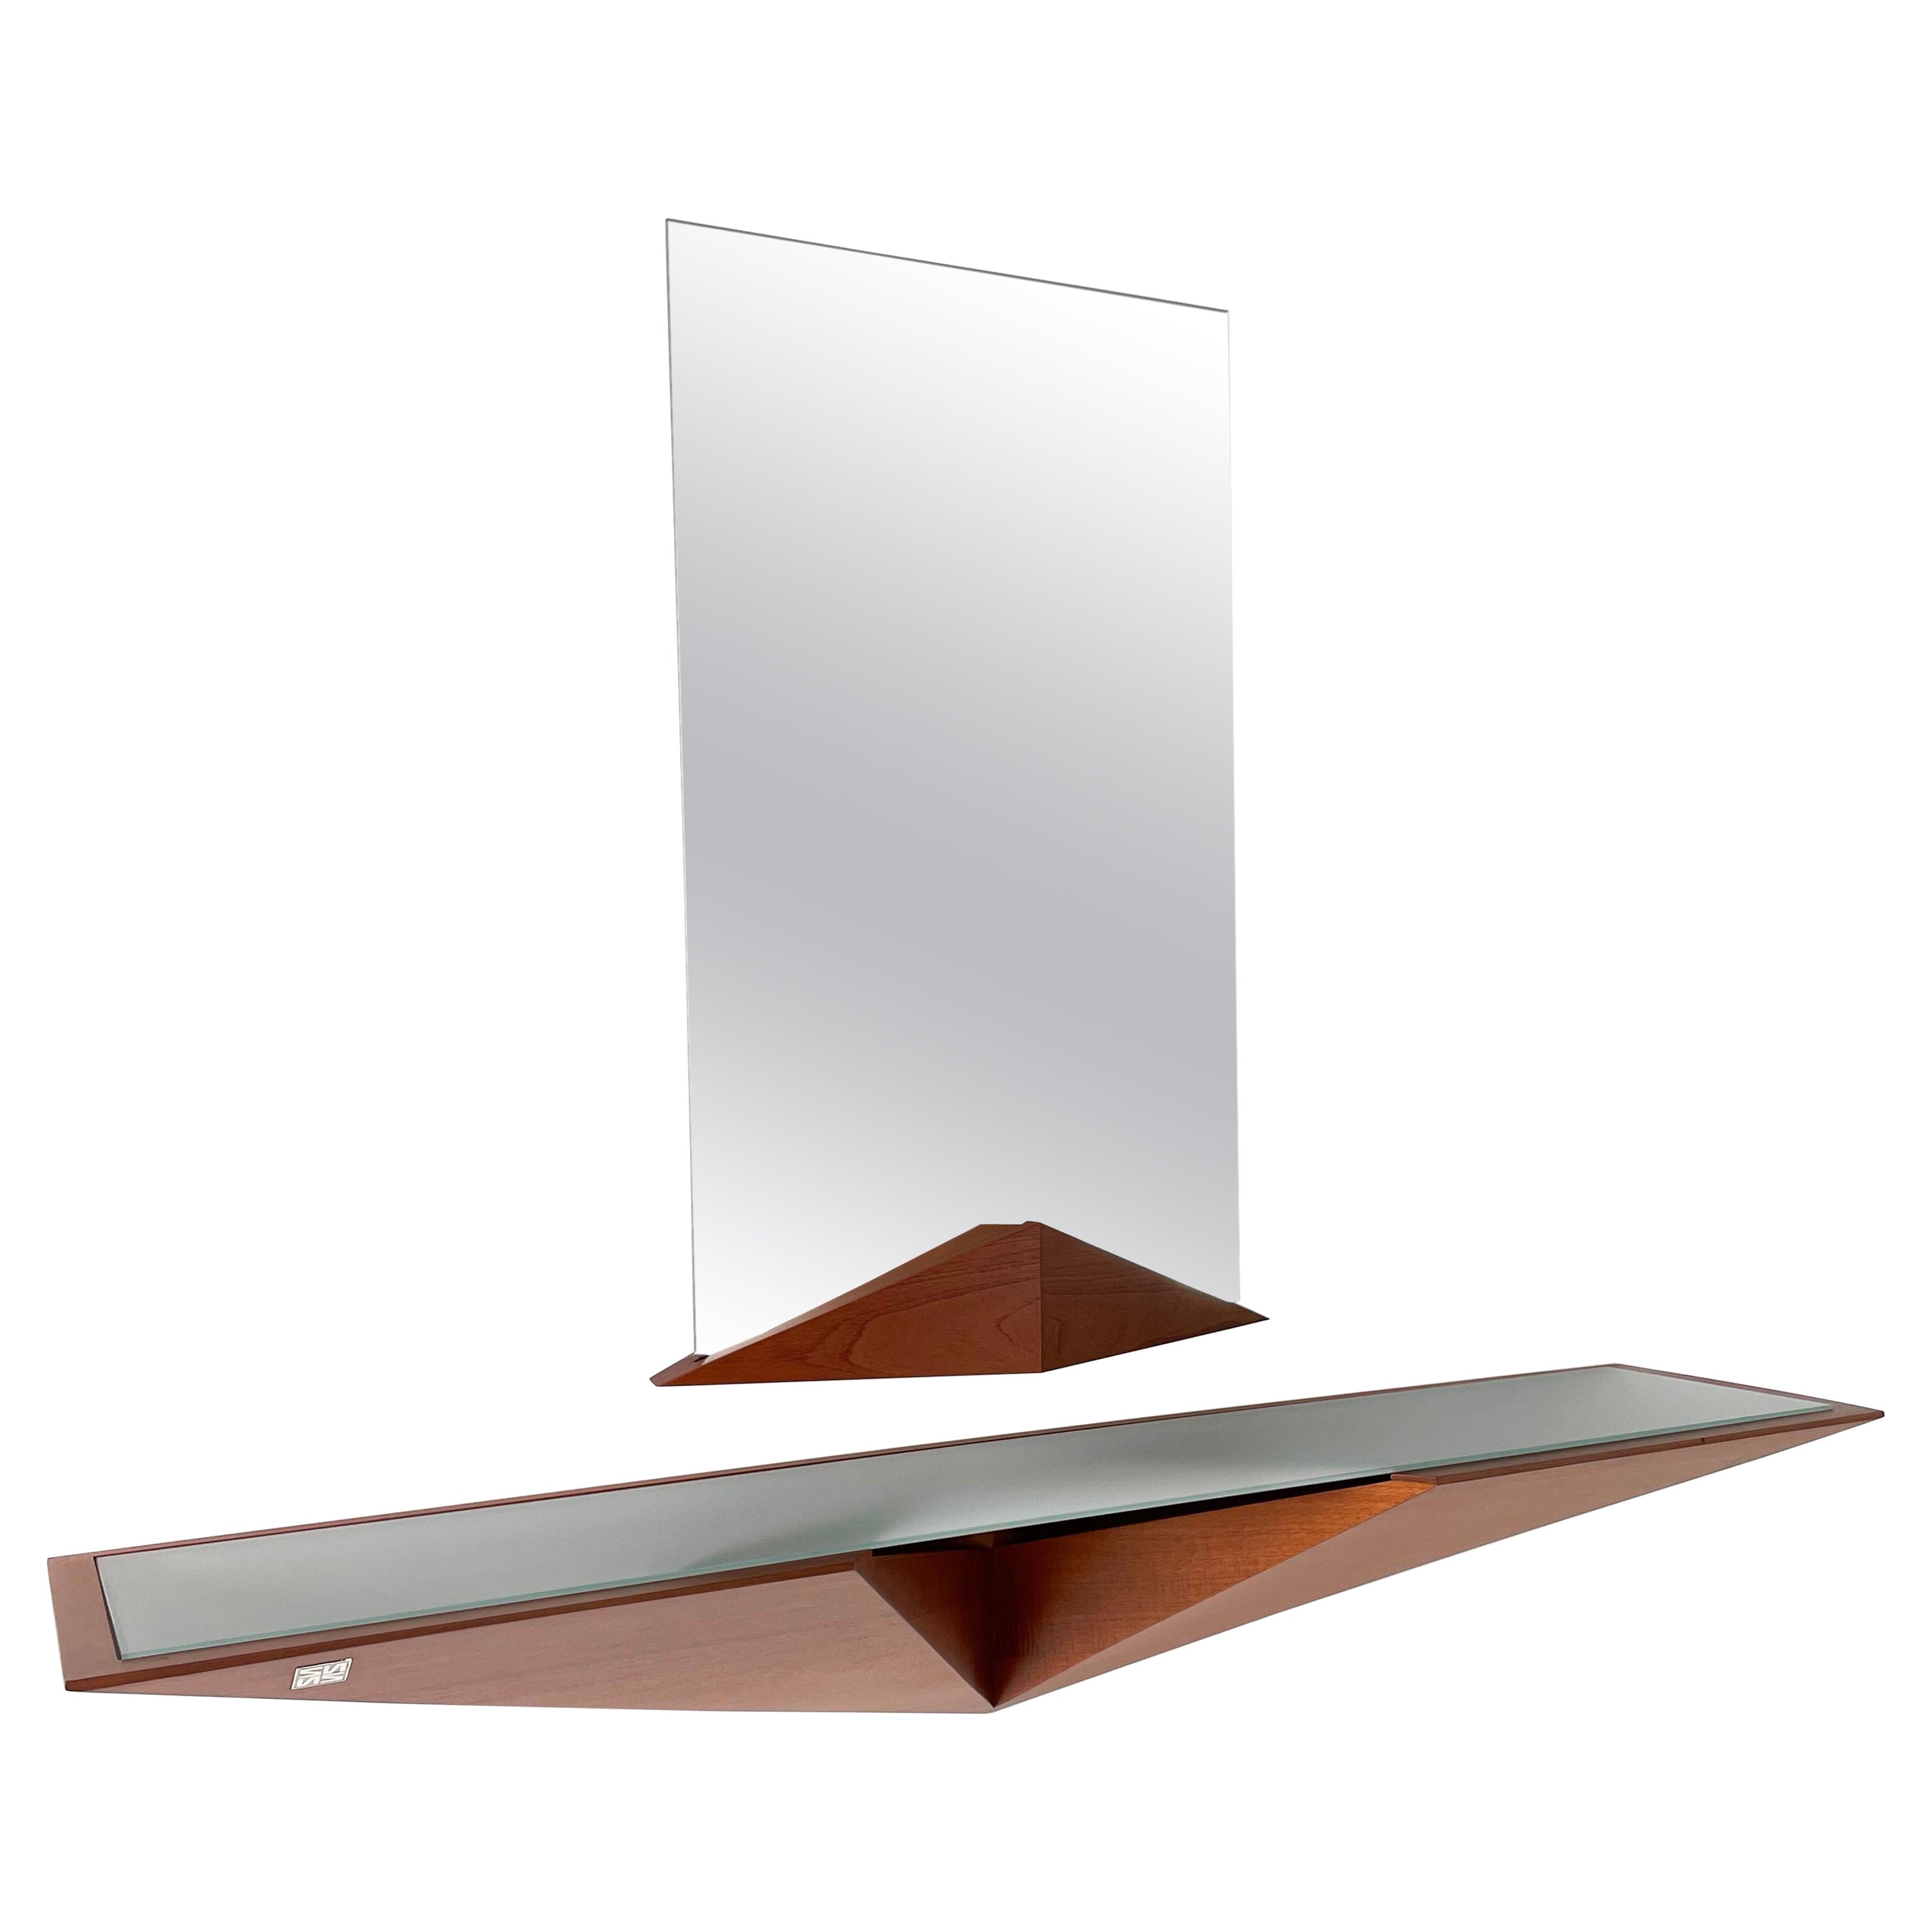 Modern Solid Wood and Glass Entry Mirror Station by Pierre Sarkis from Valentina Collection. Inspired in the Origami Folds theory, finding in basic geometry meaning of life, truth and beauty. Mirror station for halls and lobbies, sandblast glass